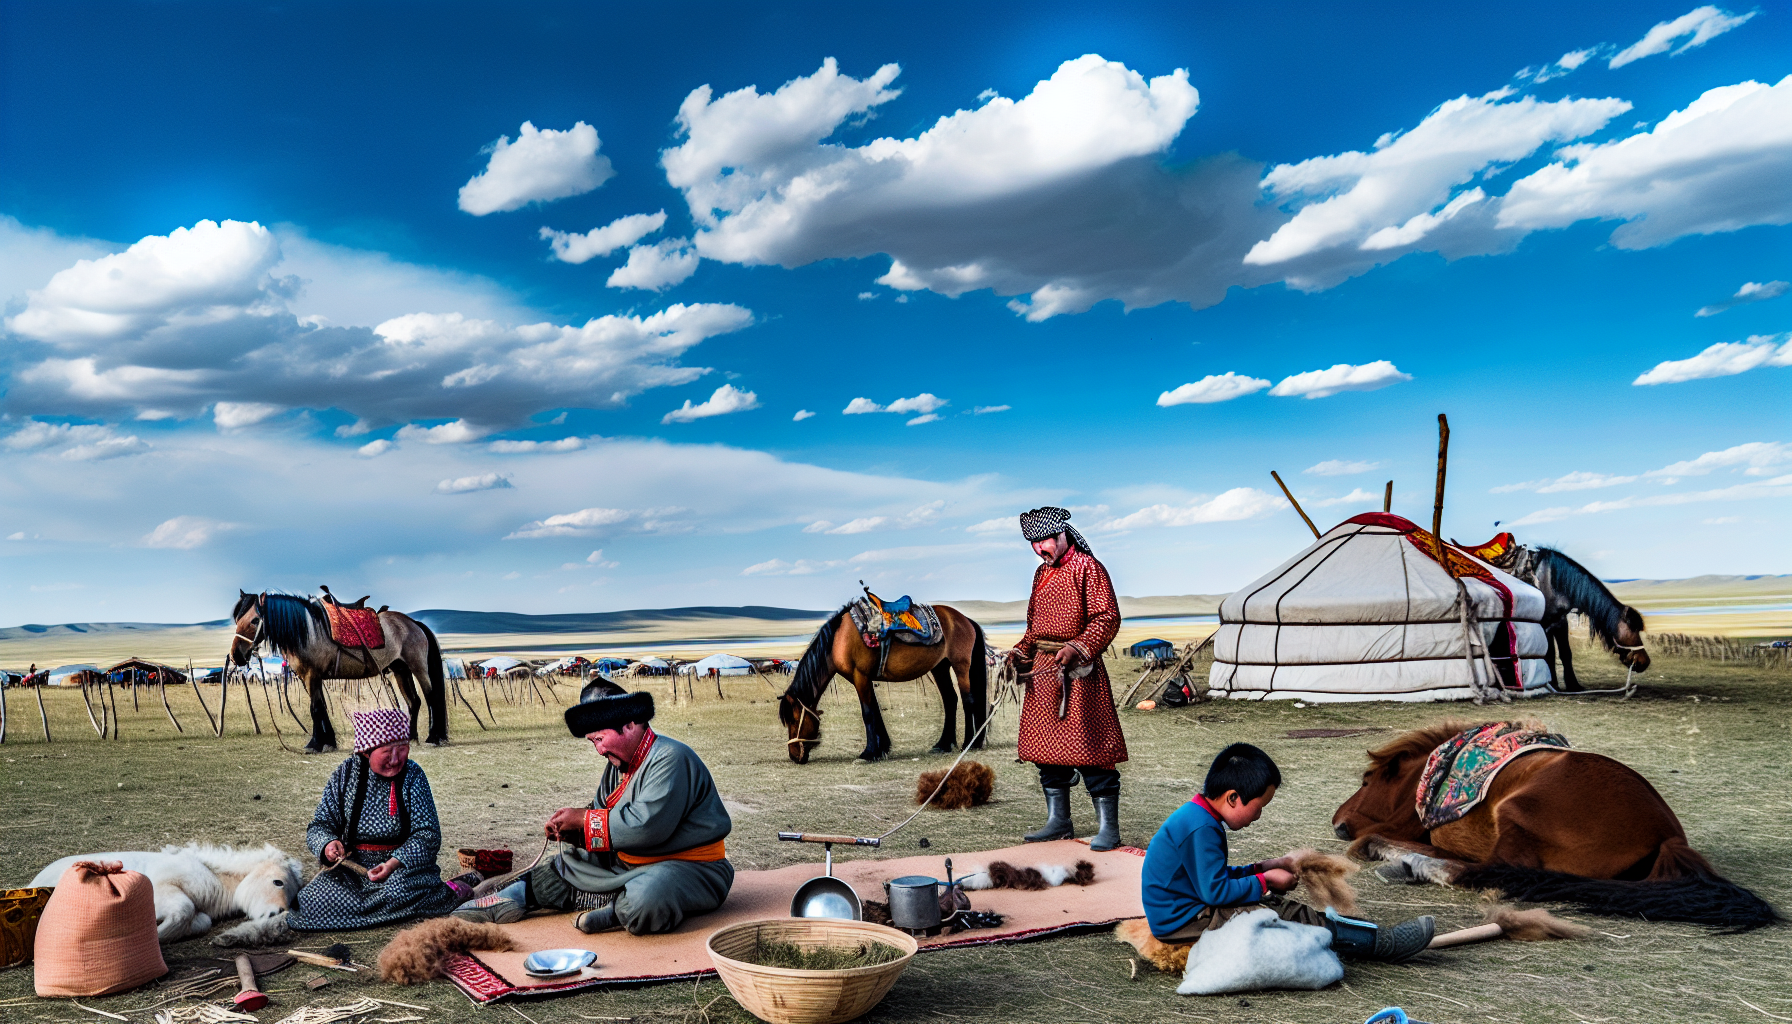 A serene image of a nomadic family engaging in traditional activities, providing an authentic experience of nomadic life during Mongolia tours.